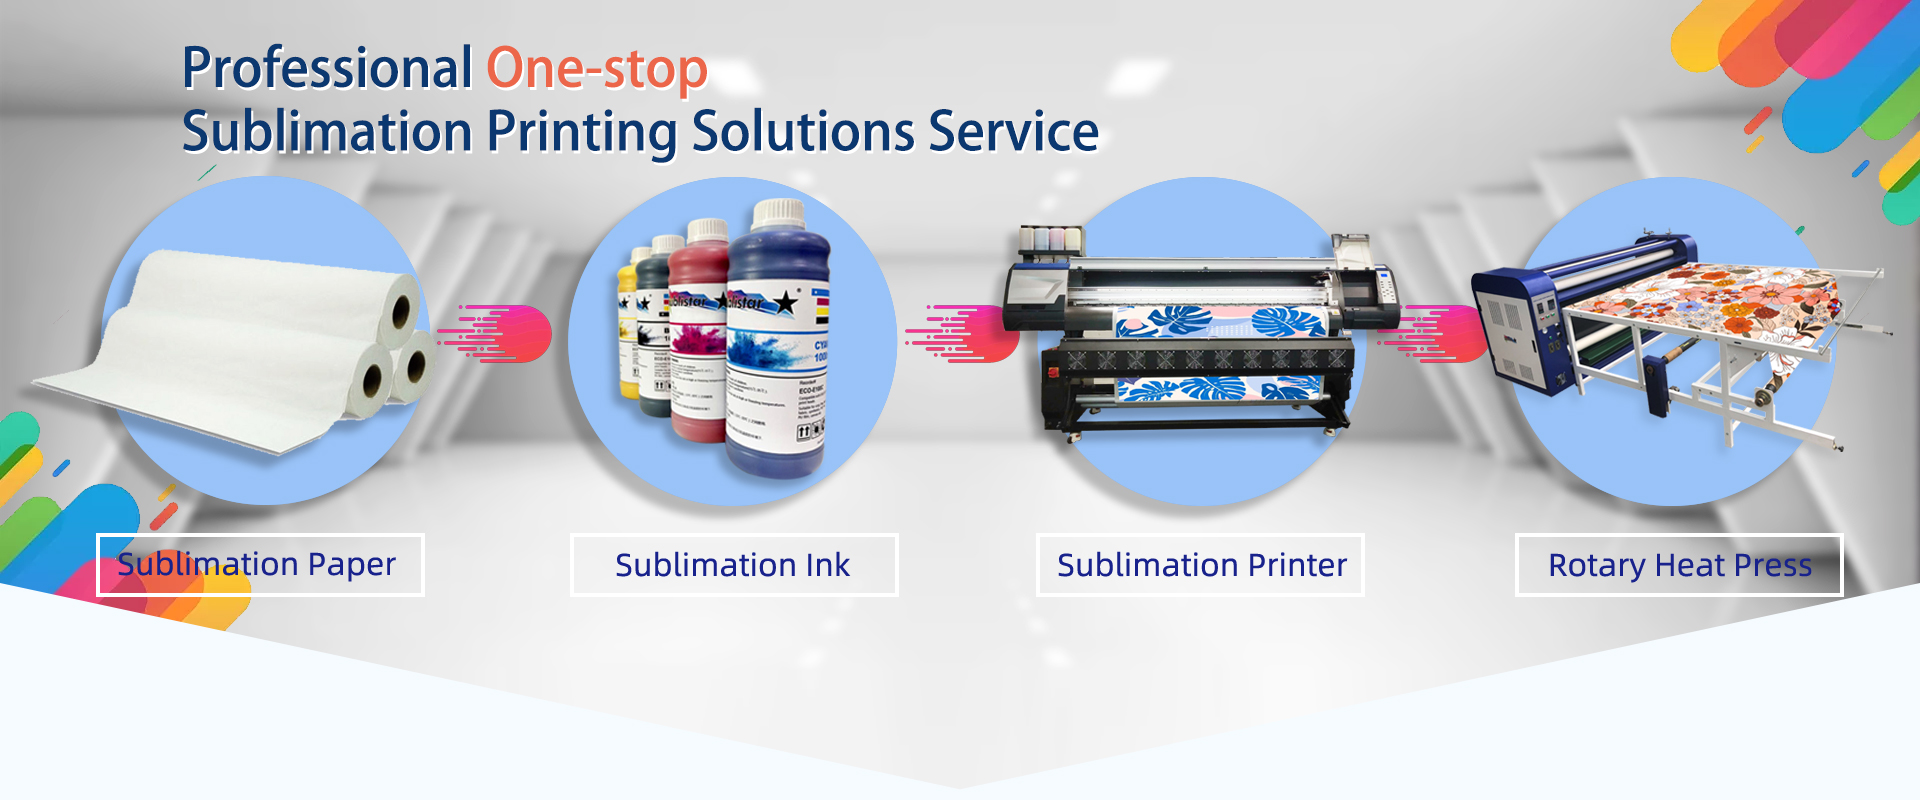 How do use sublimation ink